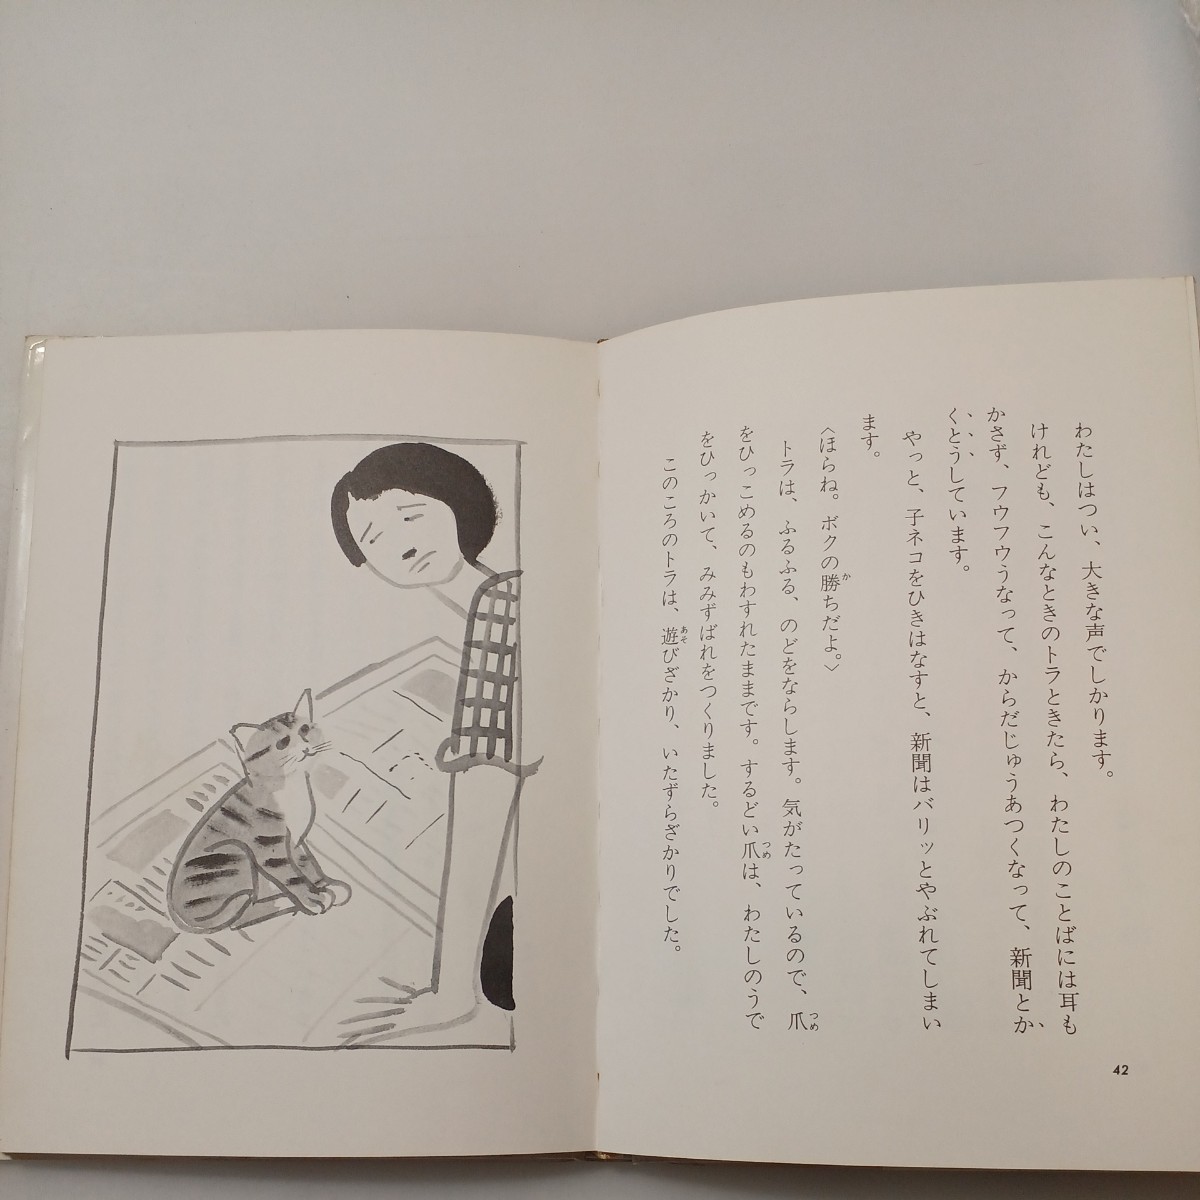 zaa-532!bok is cat ...( hill ... animal chronicle ) separate volume hill ...( work ), small . good .( illustration ) small . bookstore (1986/2/25)